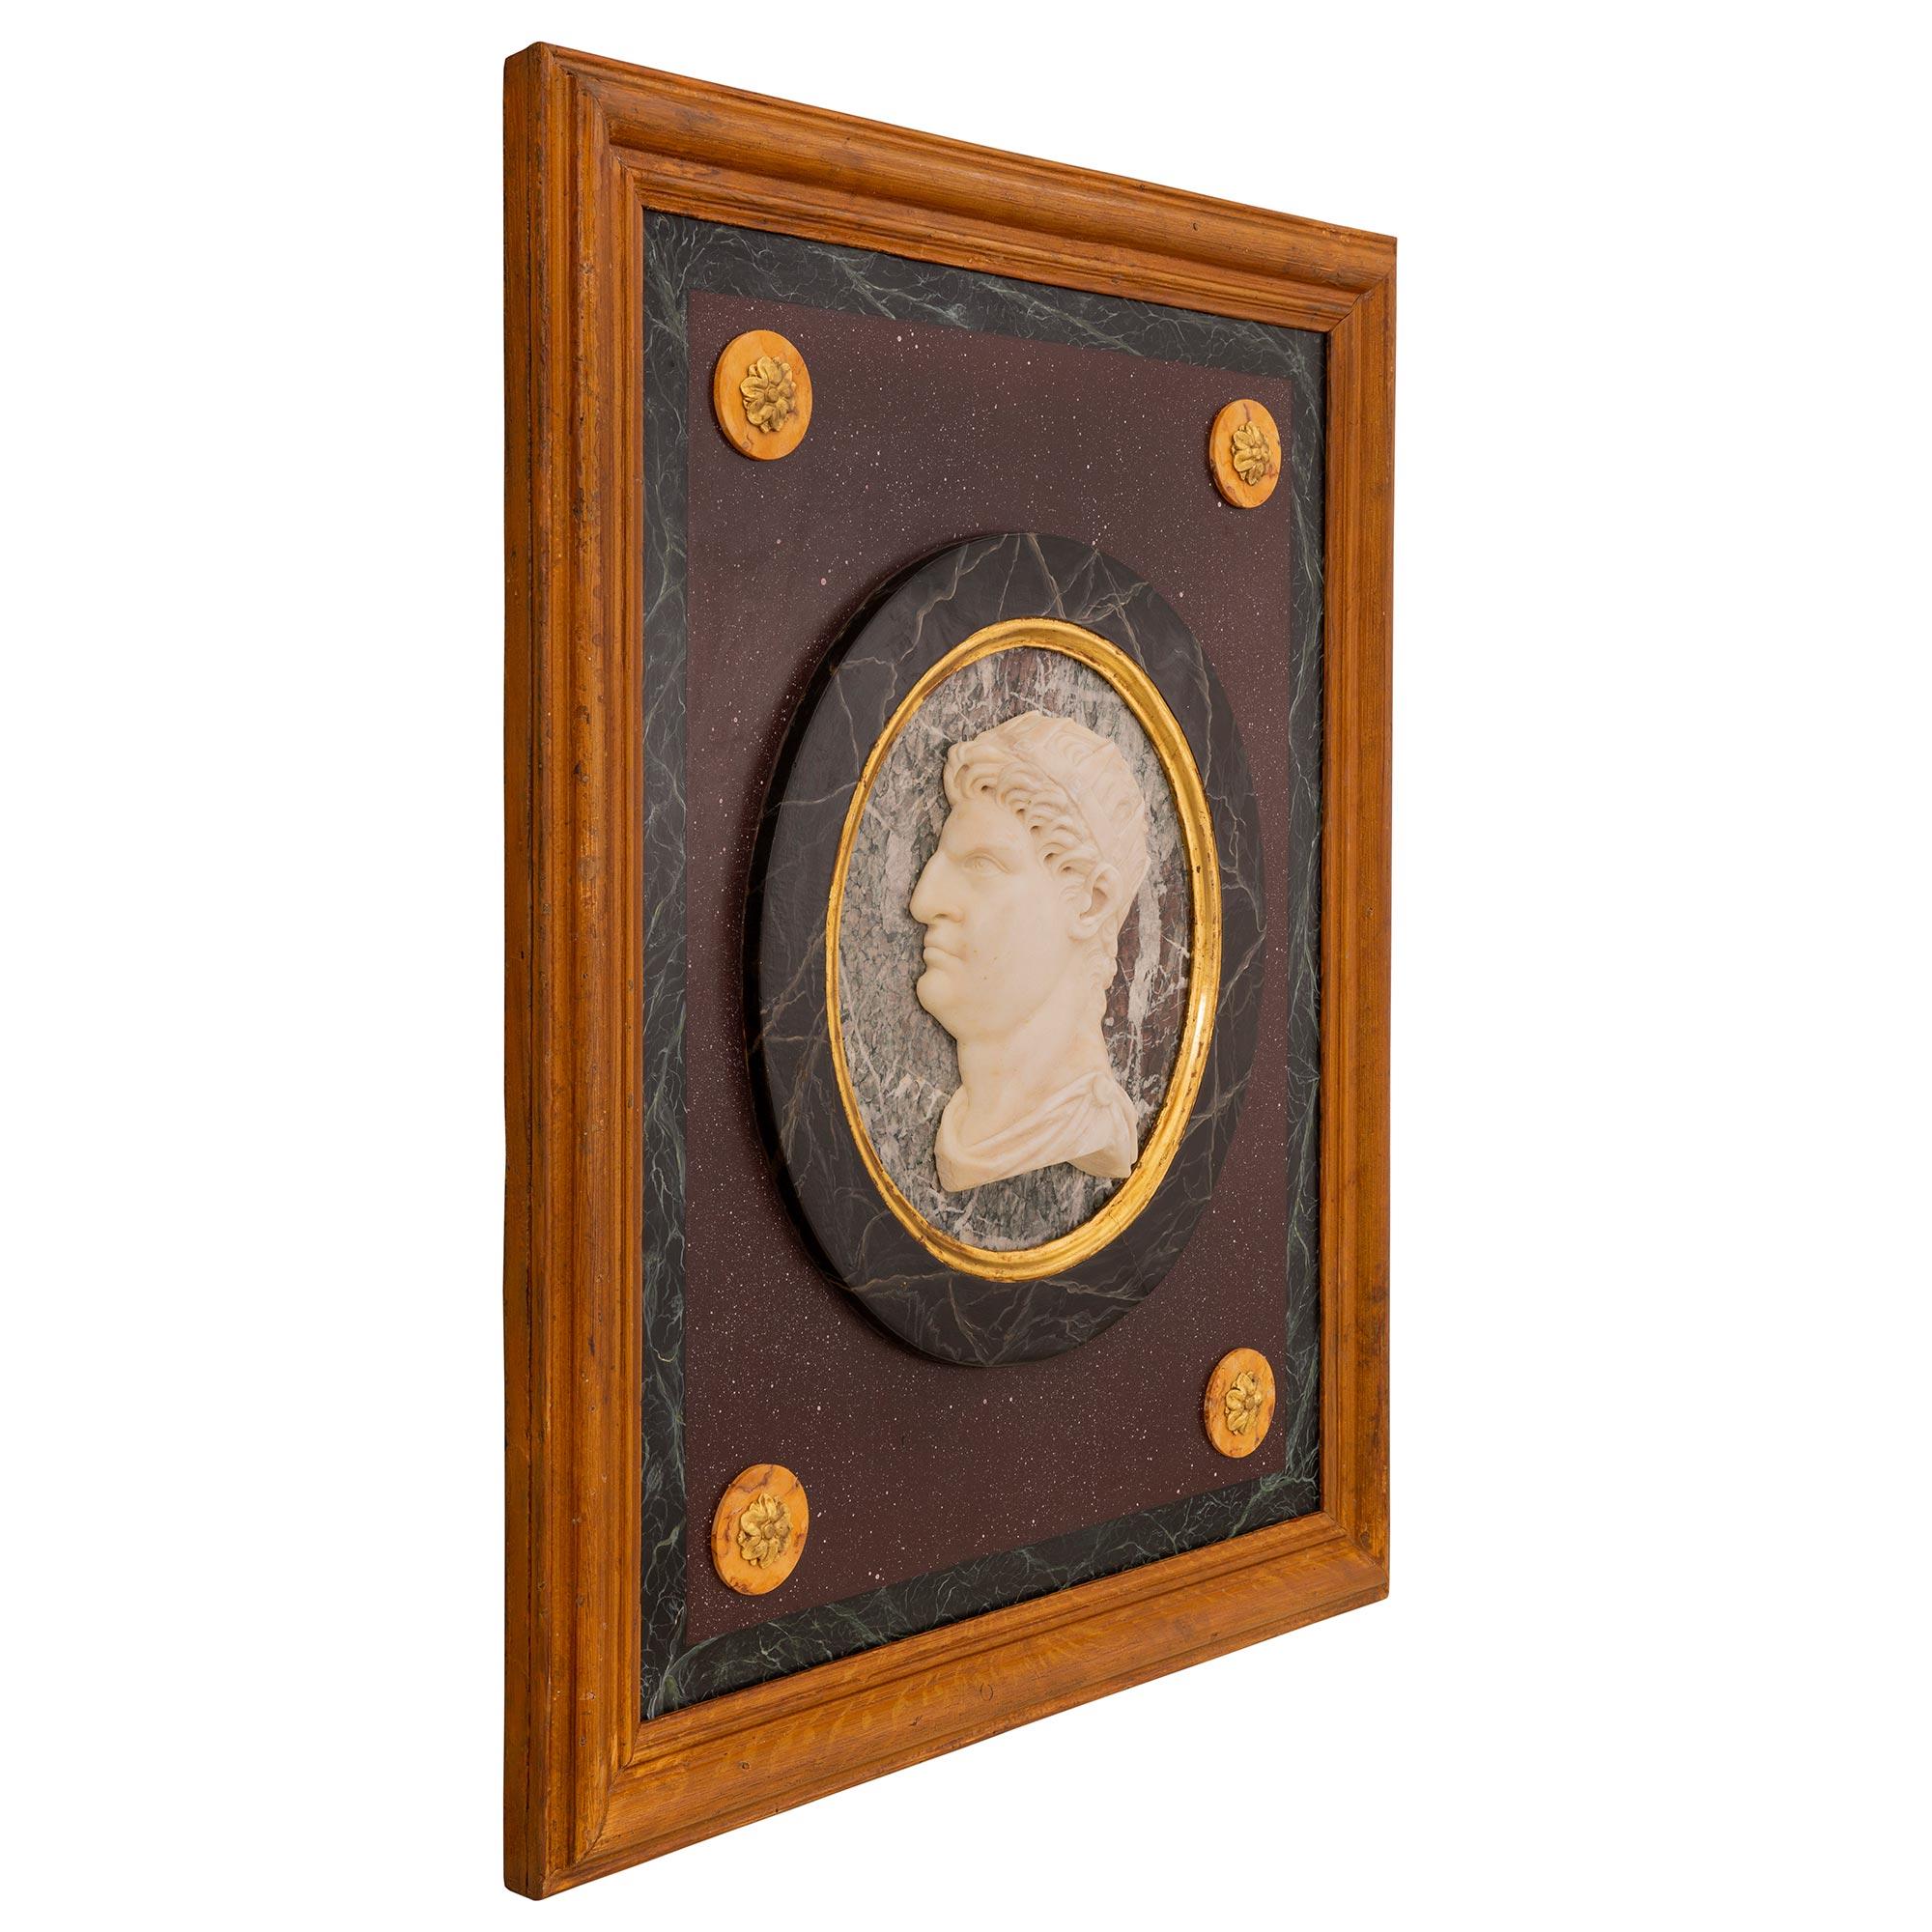 A powerful and high quality Italian 19th century neo-classical st. giltwood, white Carrara marble, faux painted marble and patinated wood decorative wall plaque of a Roman Emperor. The plaque in centered by a wonderfully carved central white Carrara